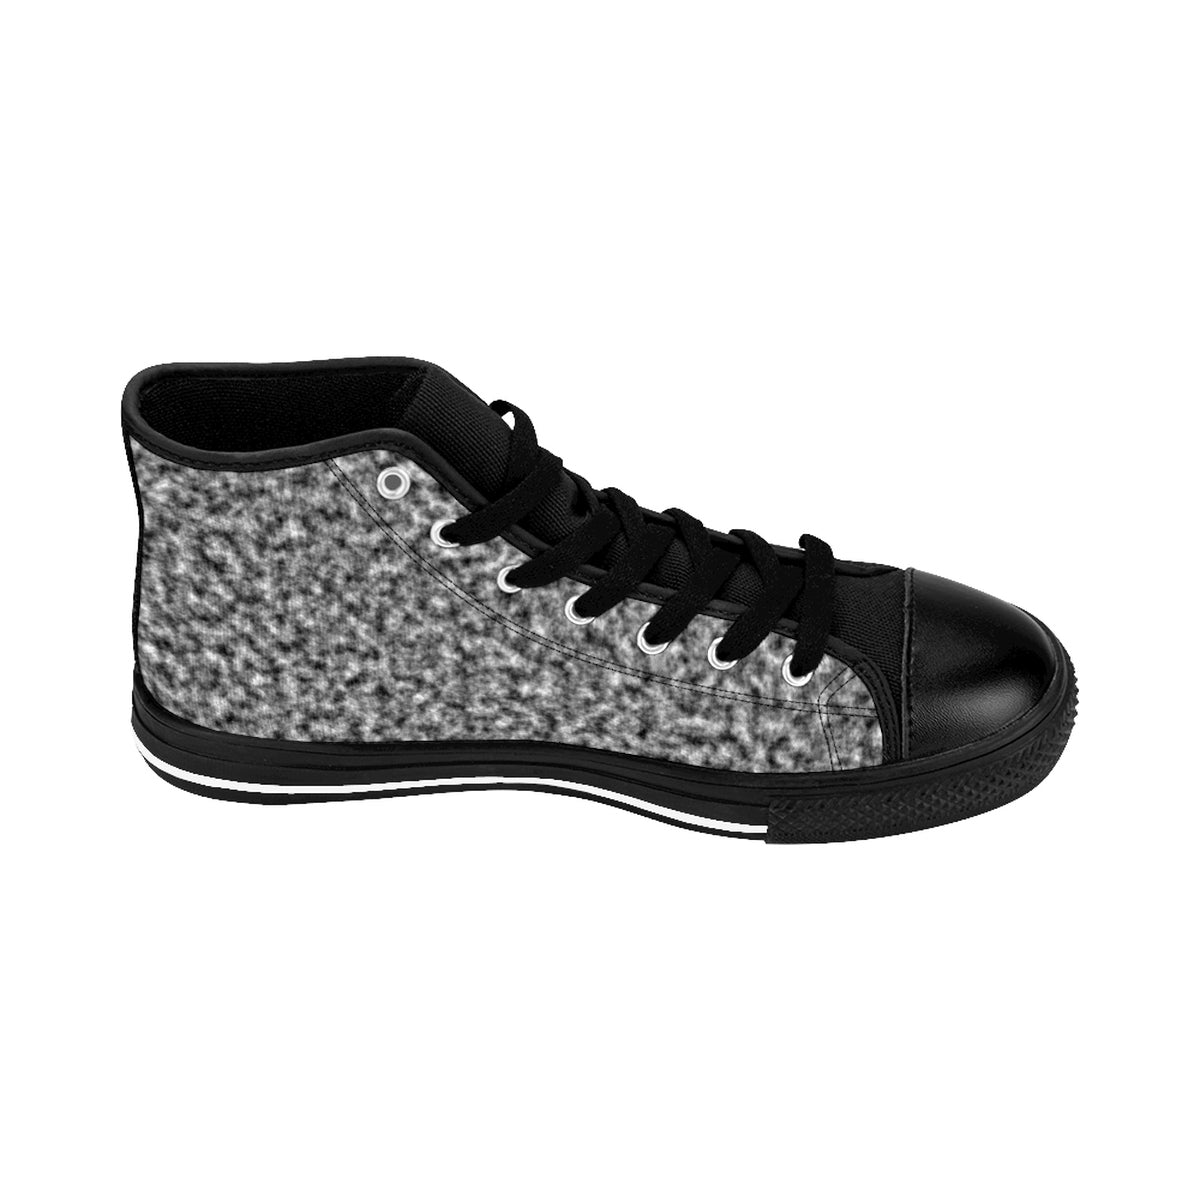 White and Black Clouds Women's High-top Sneakers